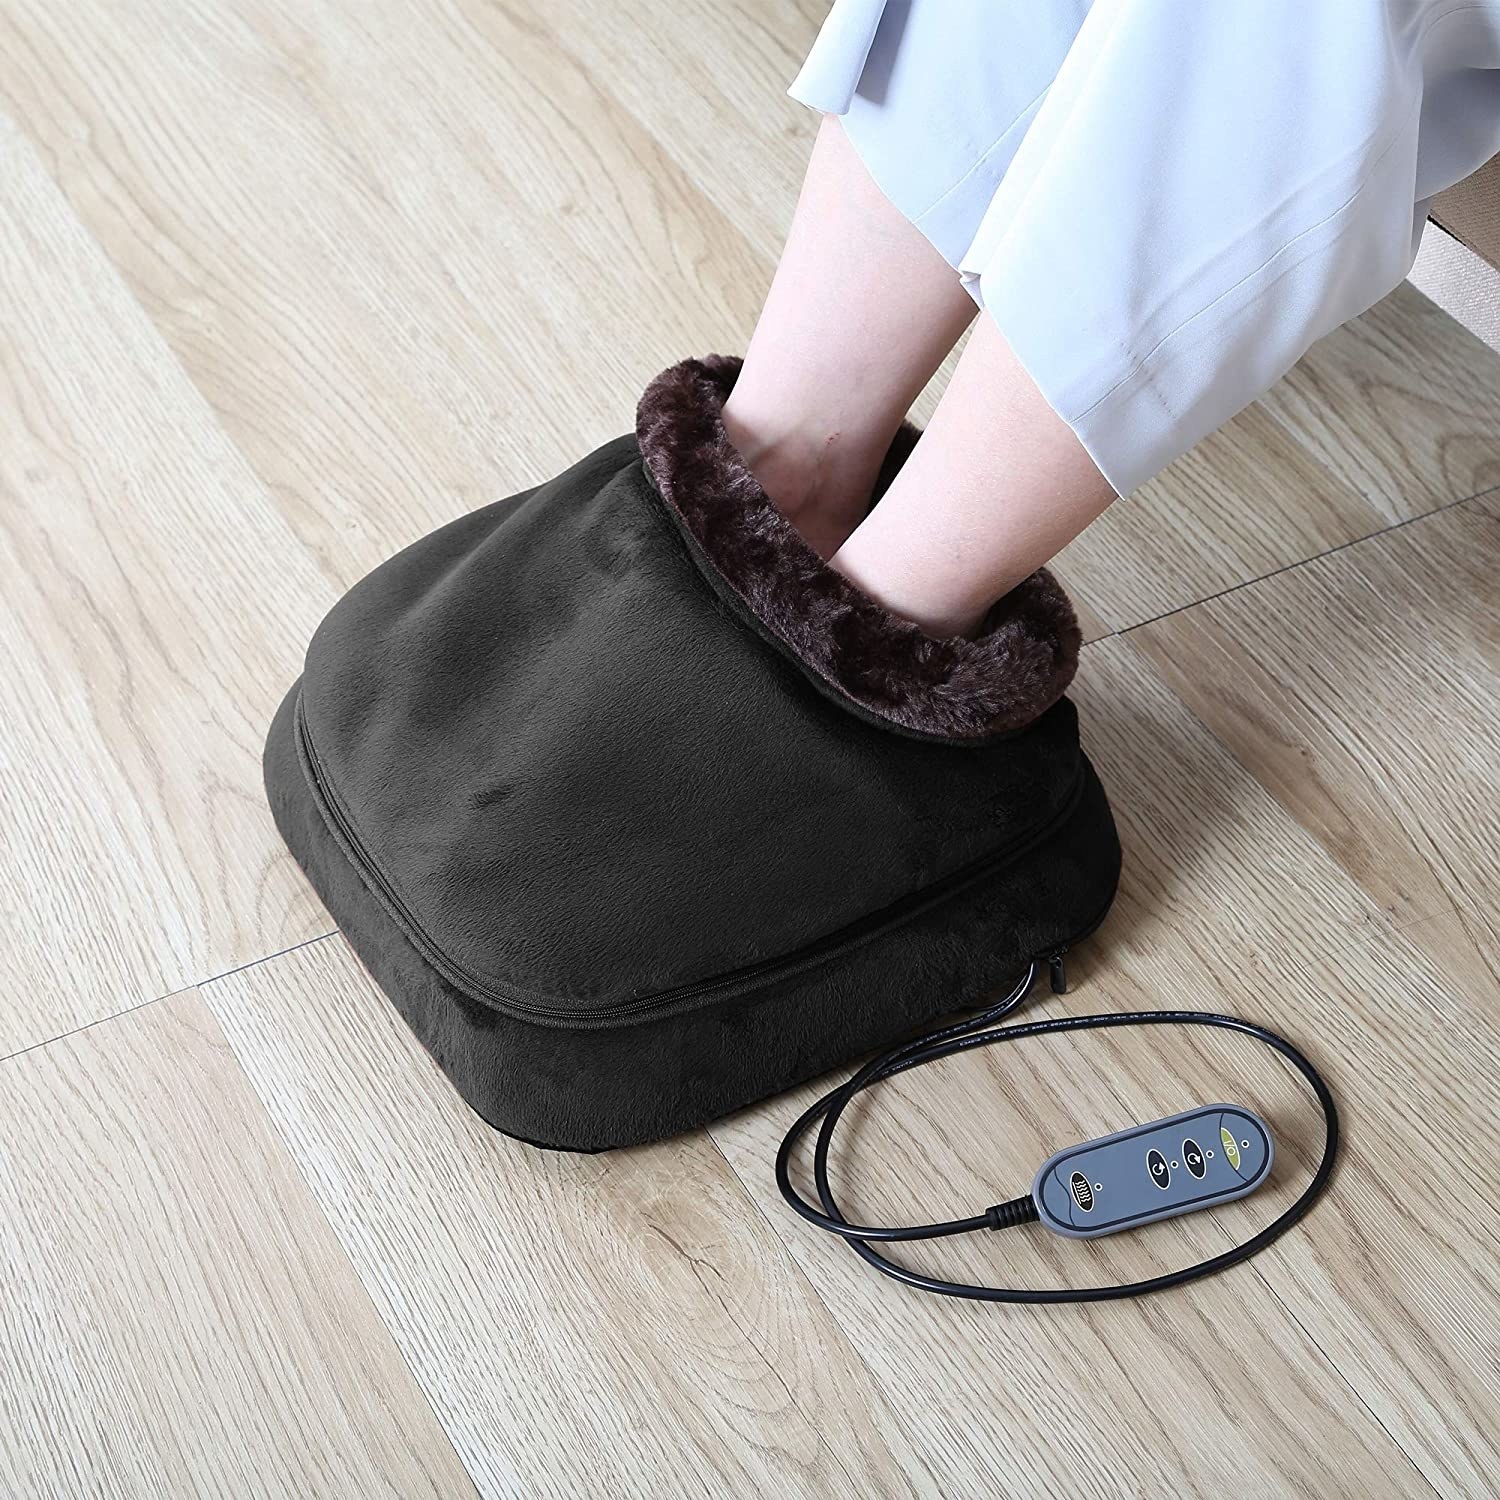 A model with their feet inside the fur-lined massager